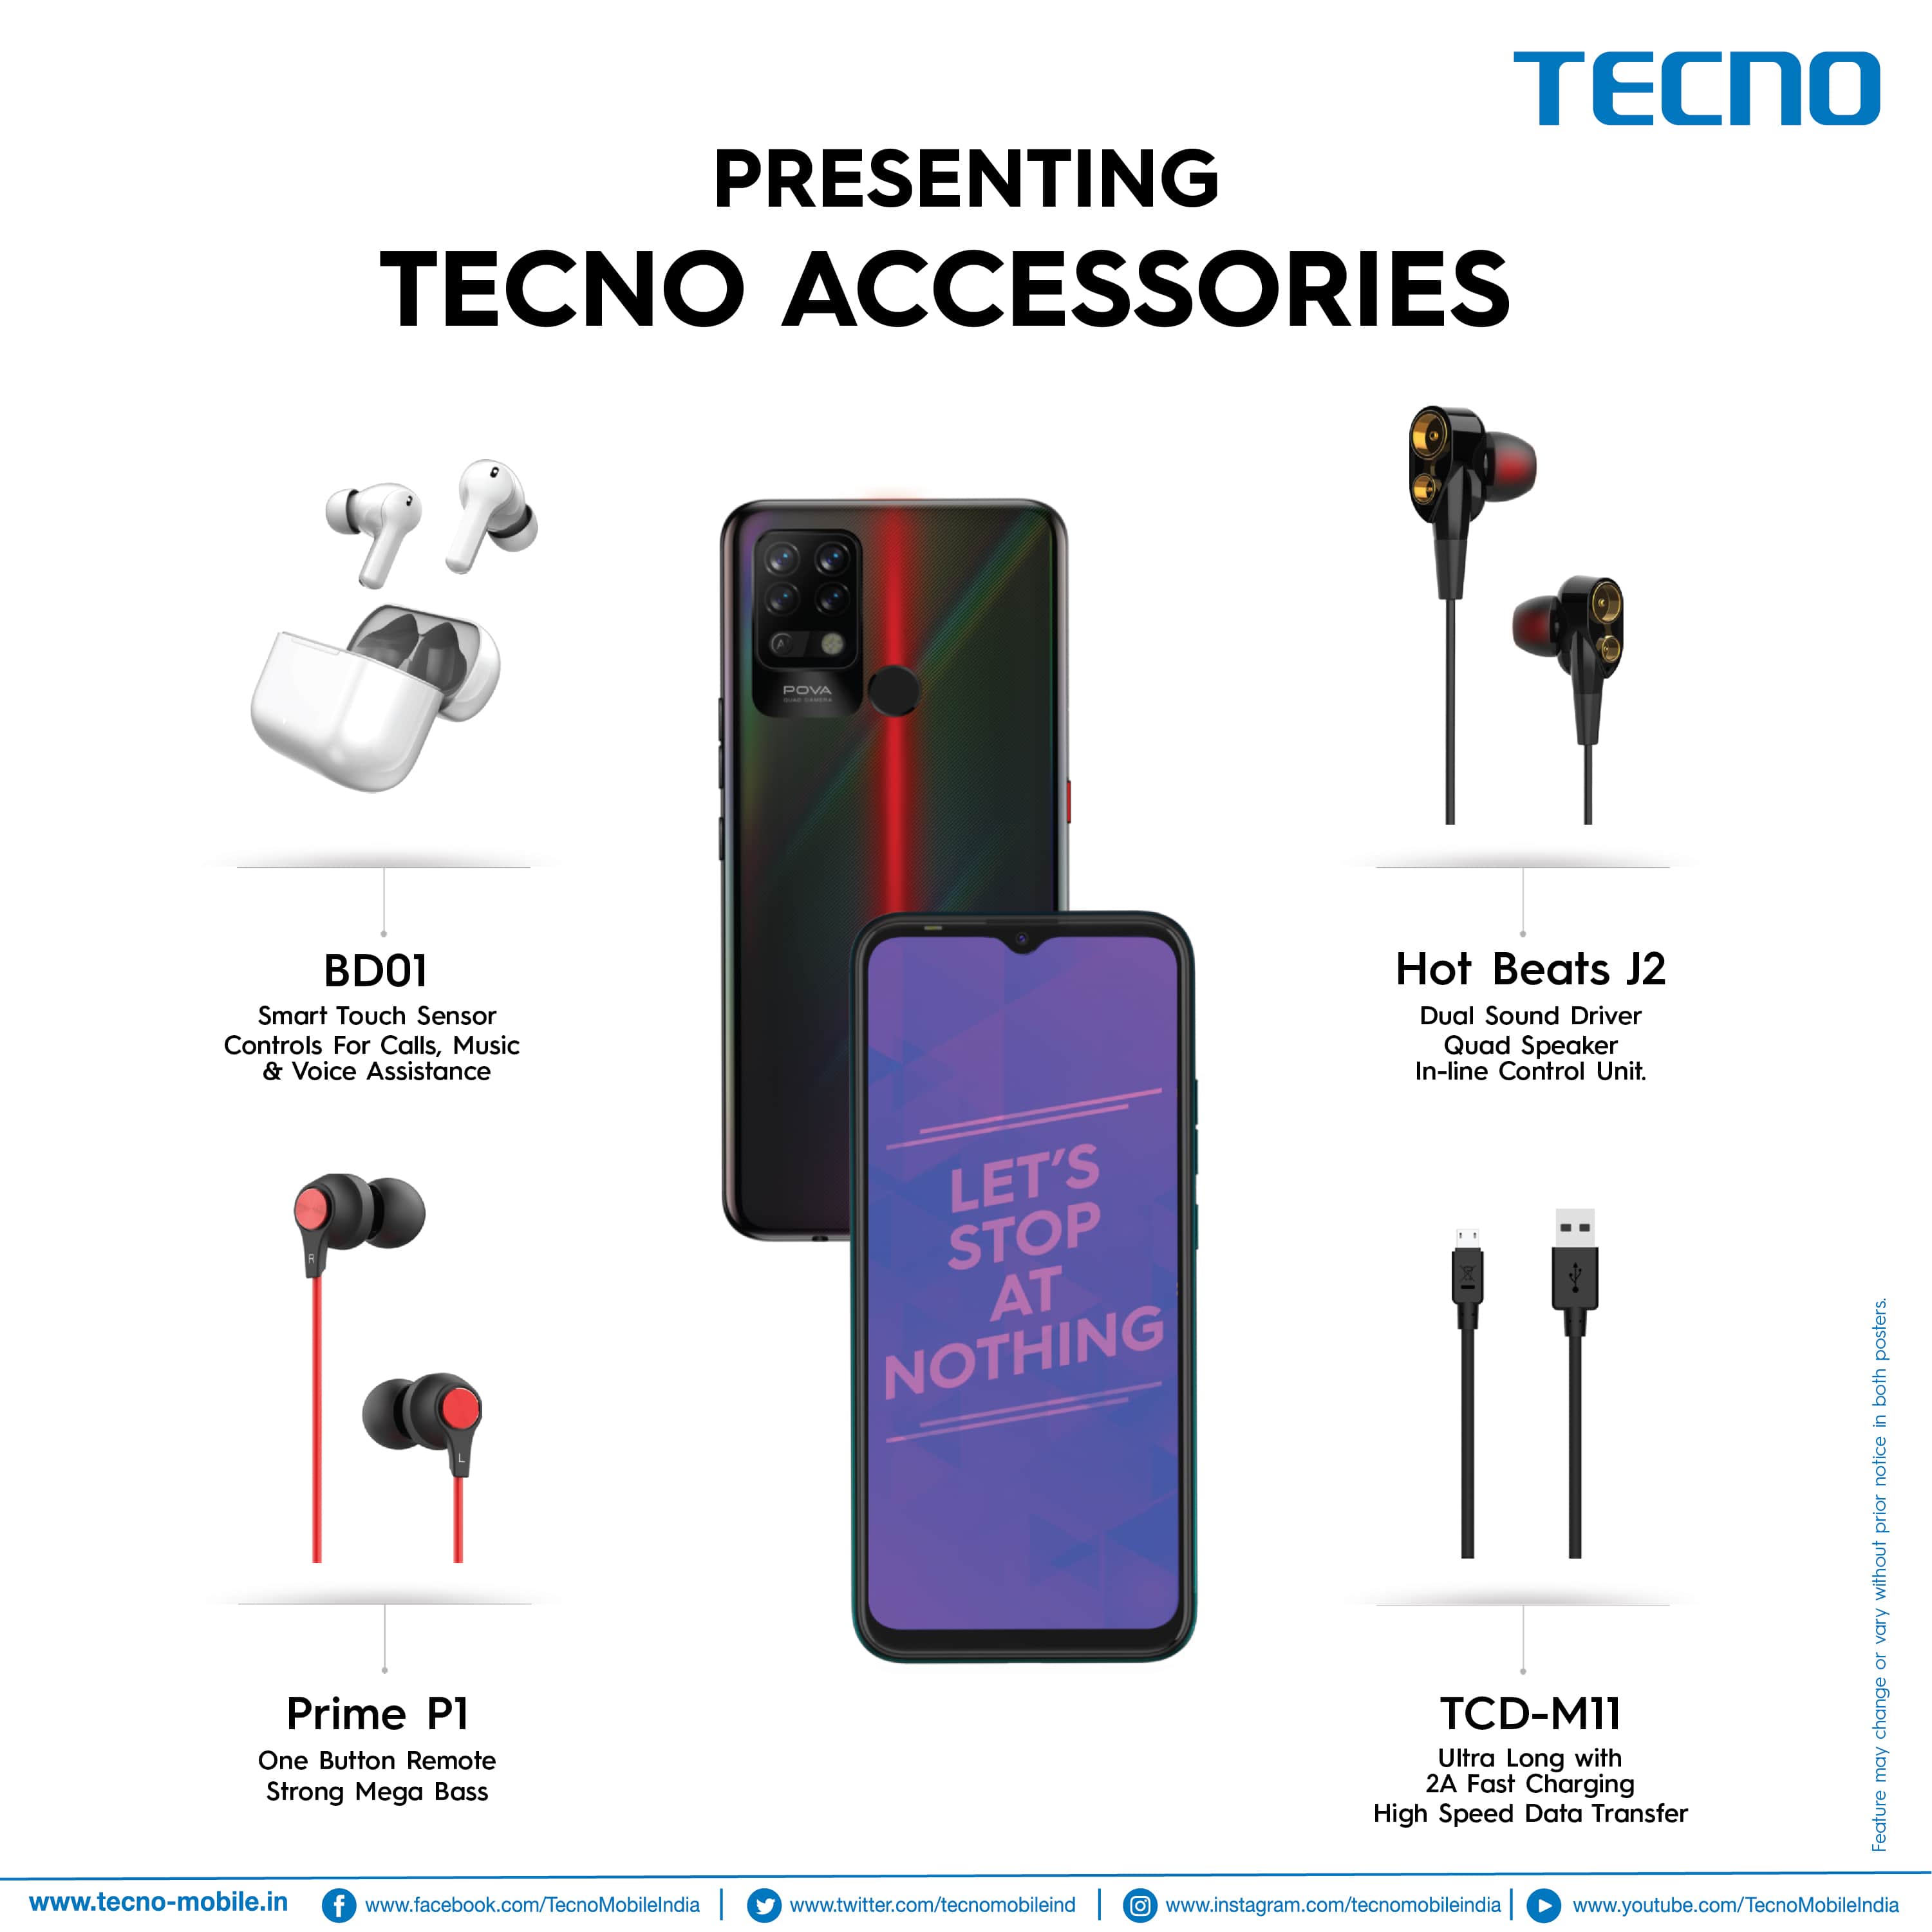 TECNO expands its accessories portfolio with a range of new products at disruptive price-points